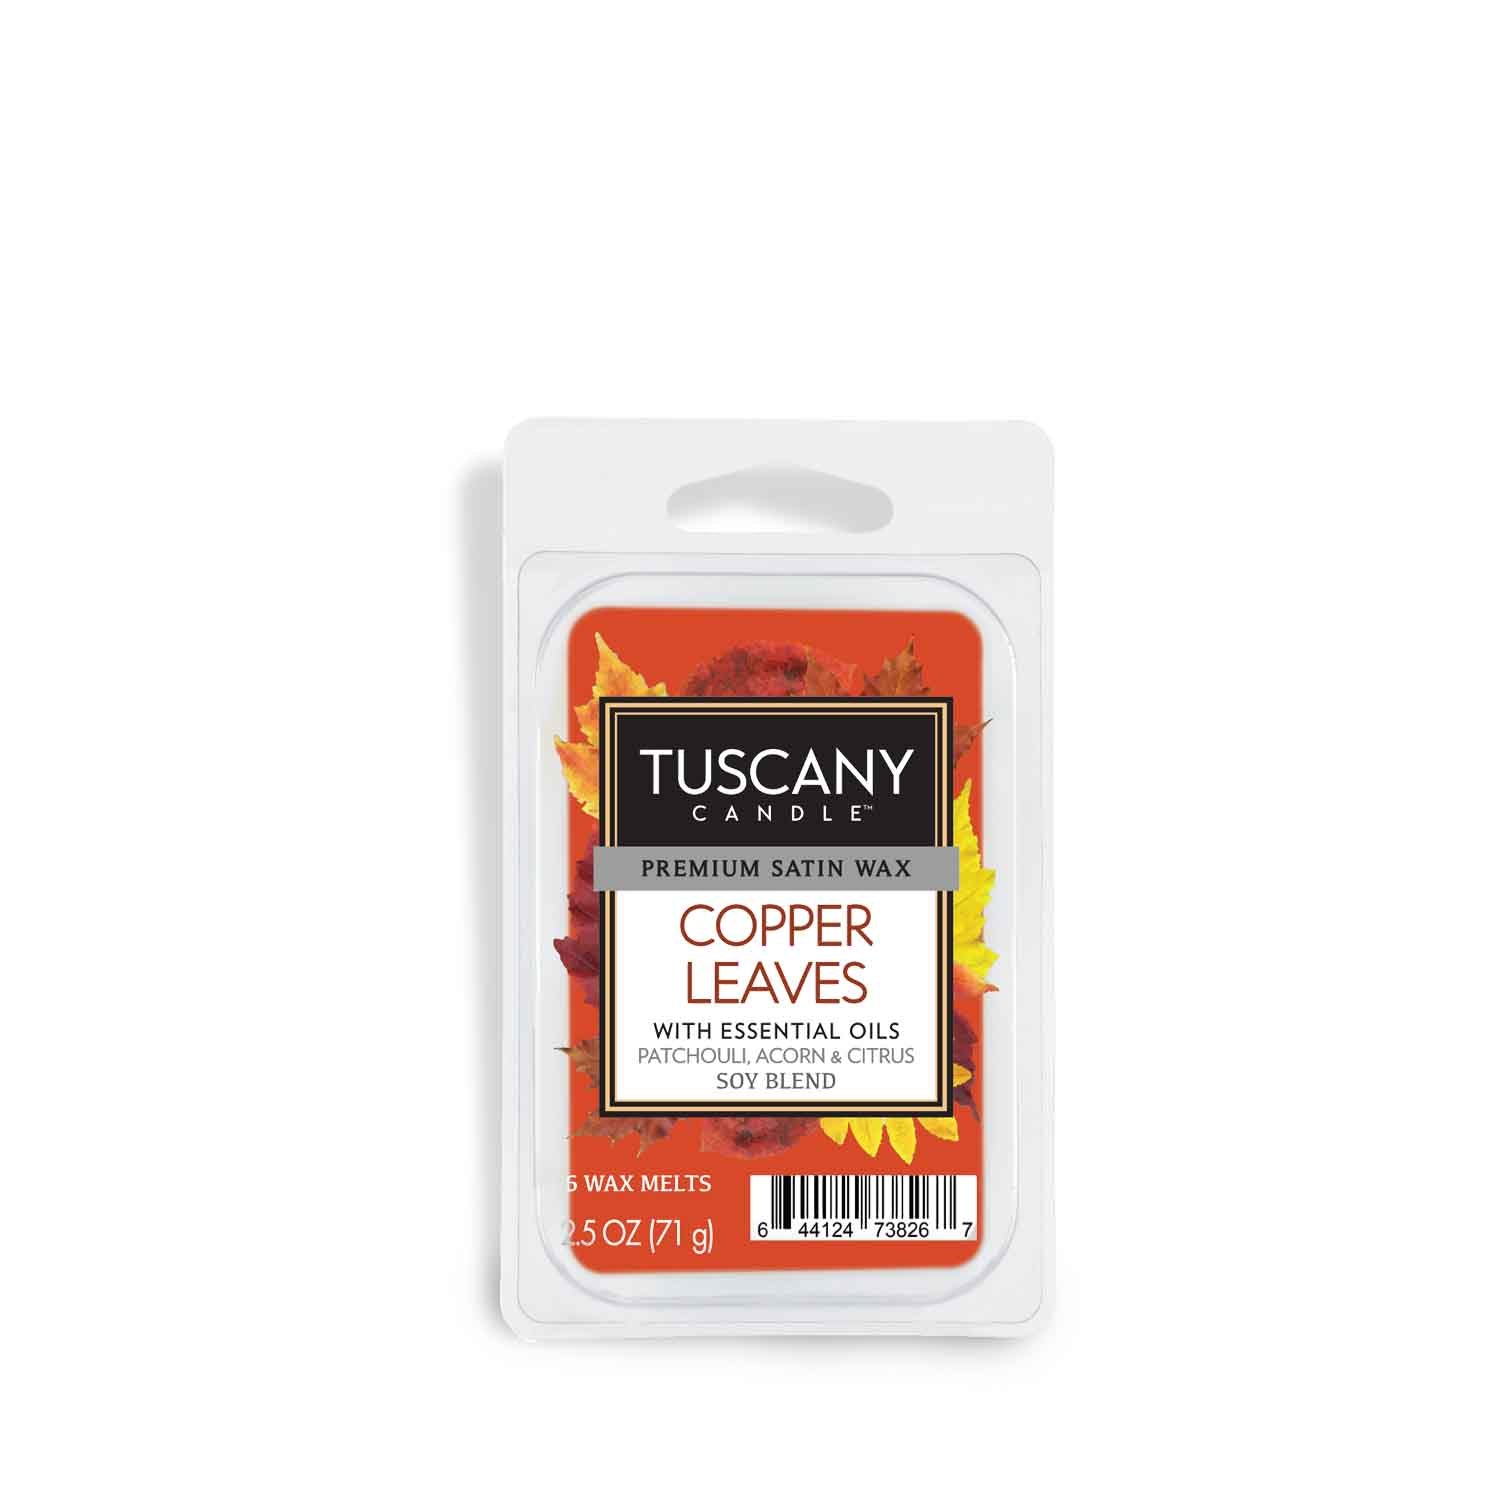 Tuscany Candle Copper Leaves Scented Wax Melt (2.5 oz) fragrance bars.